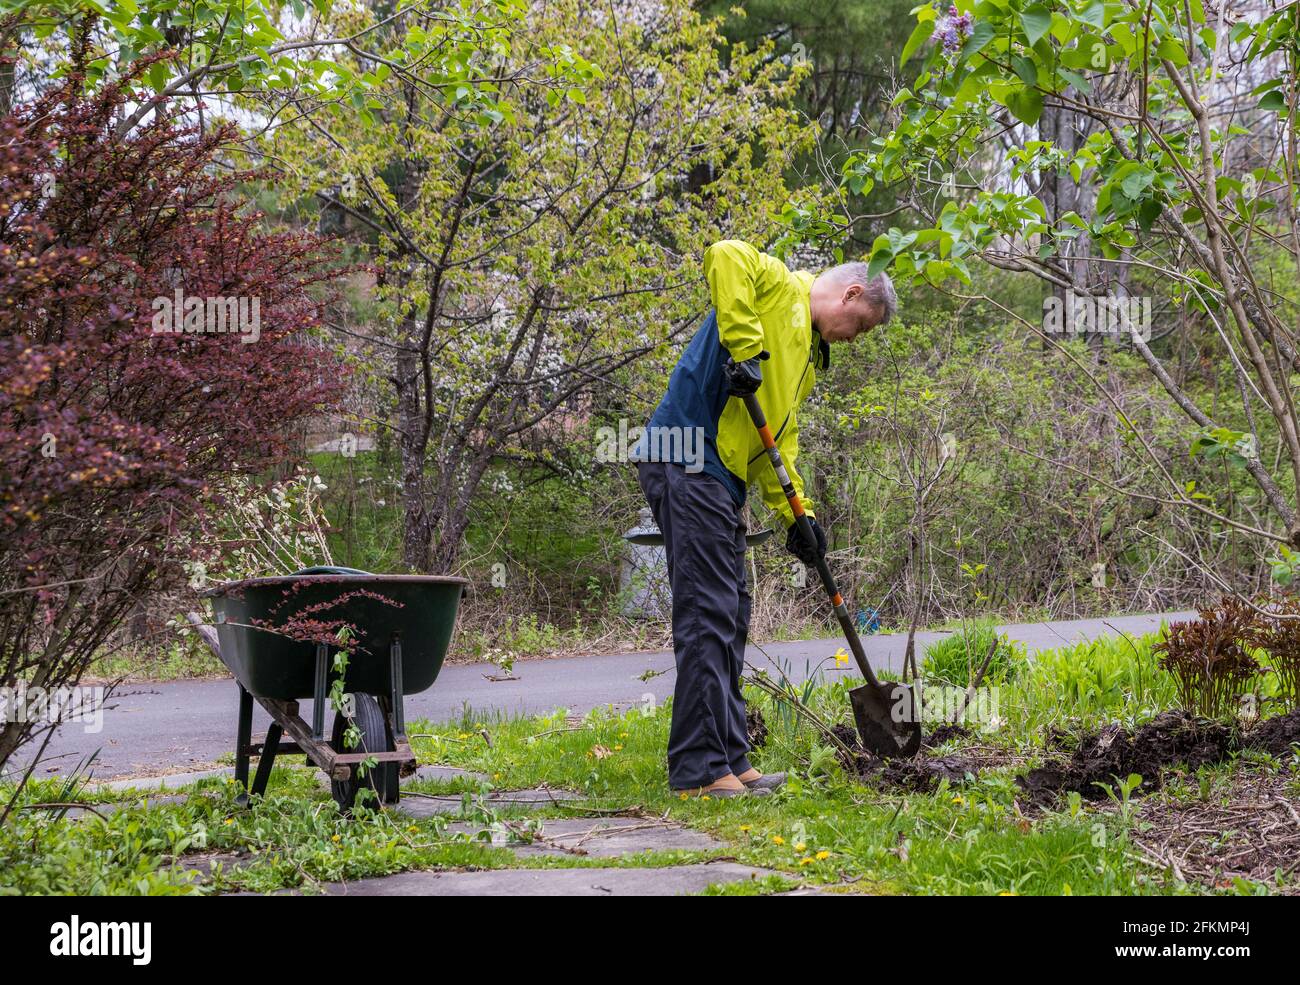 Planting an American Garden In Northeast USA Stock Photo